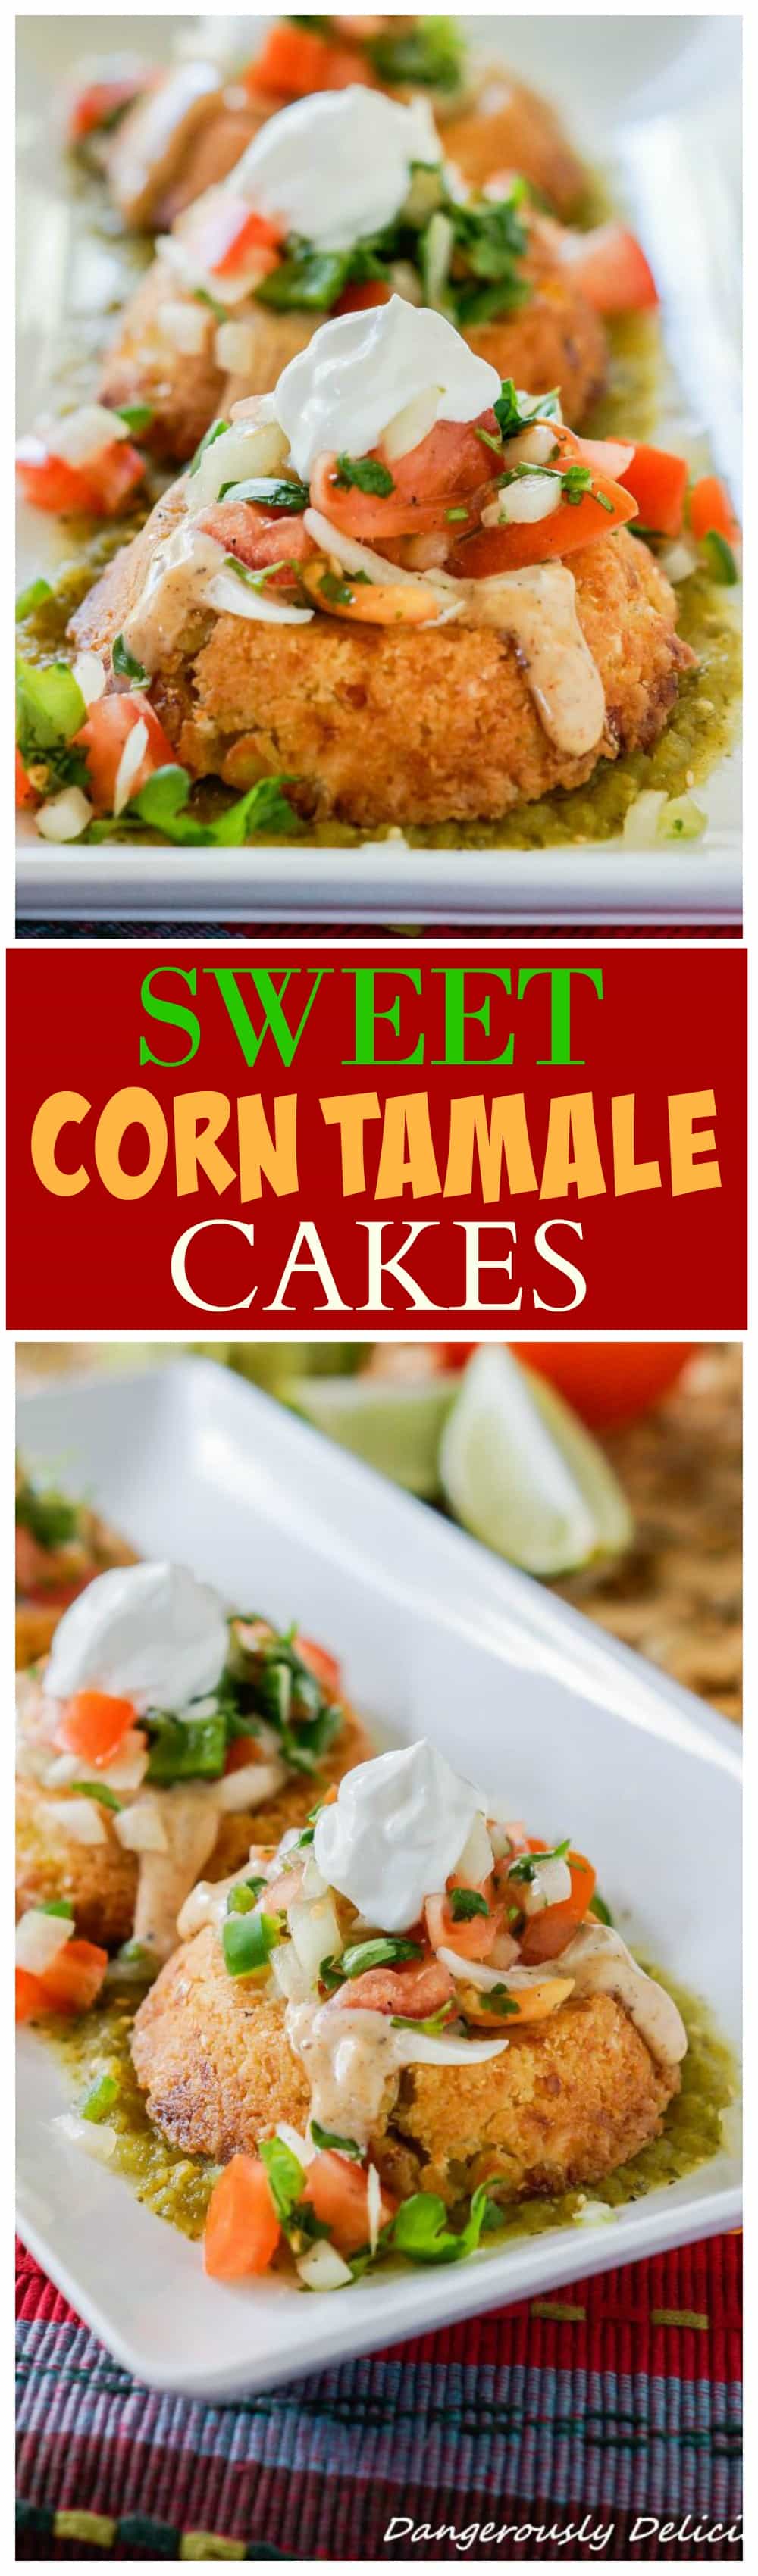 Thank you Crystal from Dangerously Delicious for sharing these Sweet Corn Tamale Cakes!